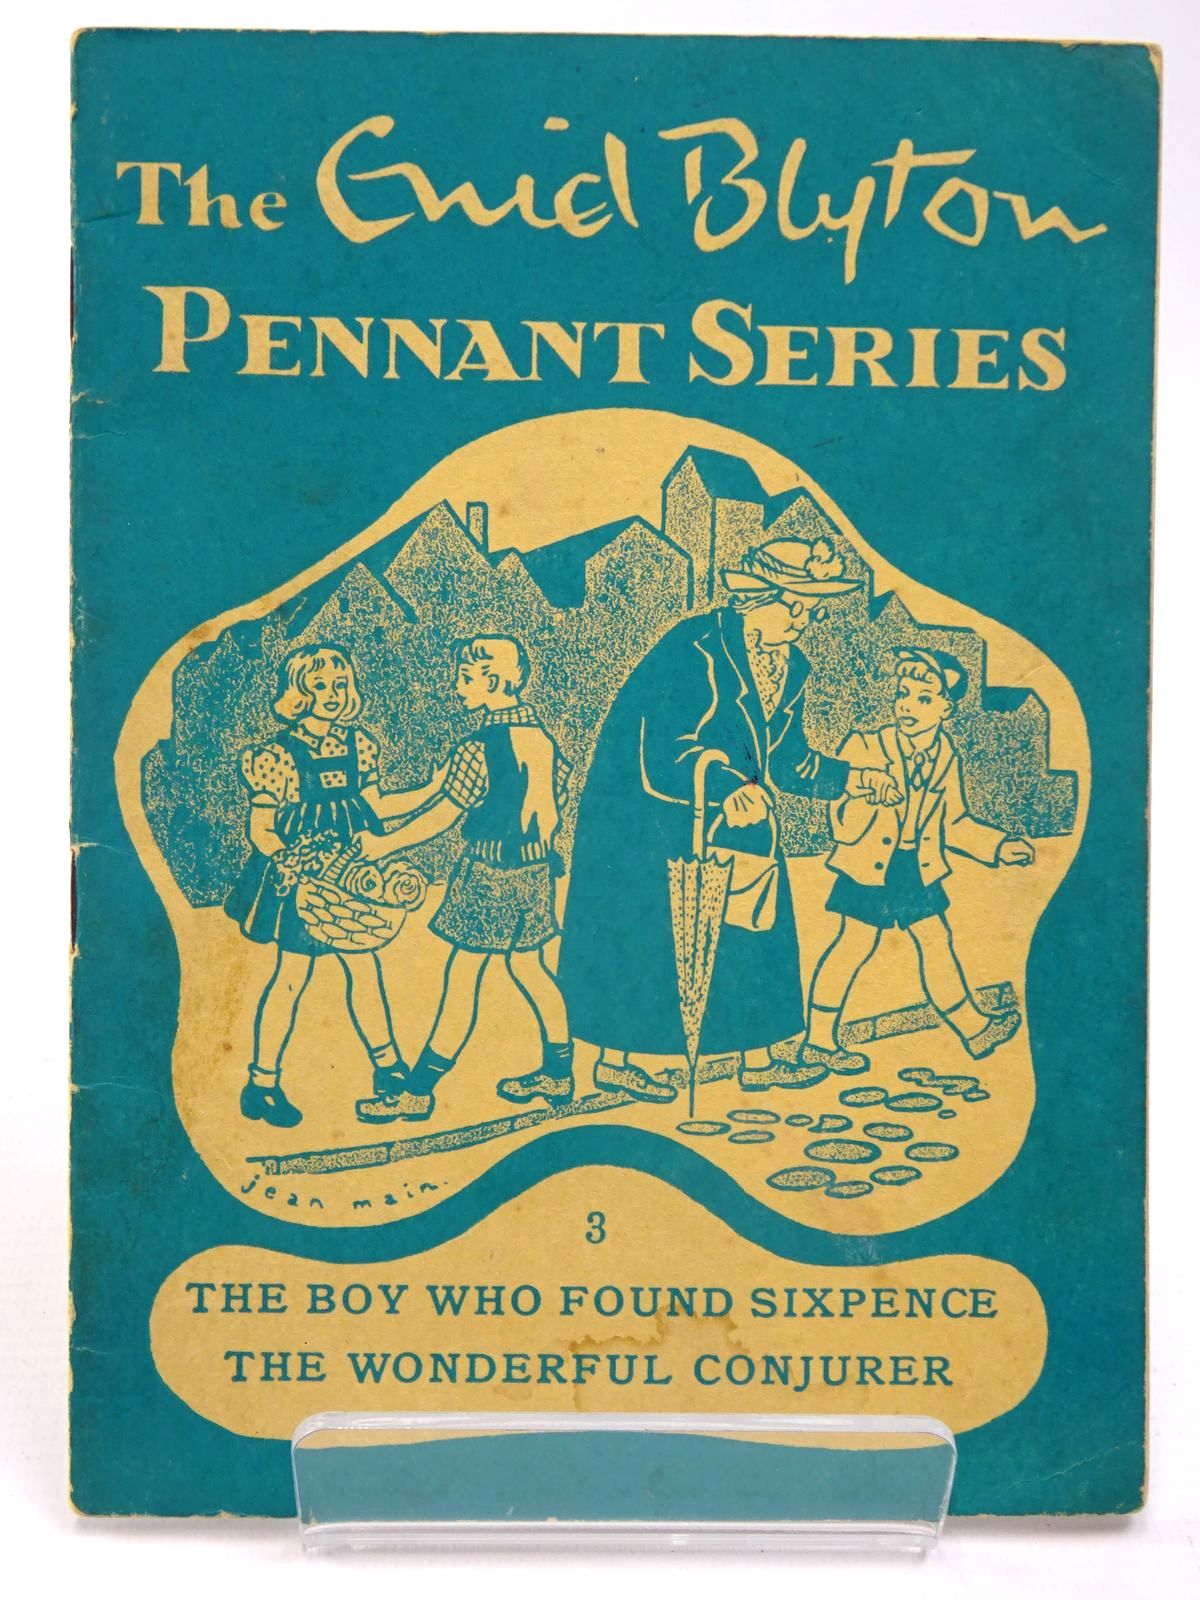 Photo of THE ENID BLYTON PENNANT SERIES No. 3 THE BOY WHO FOUND SIXPENCE / THE WONDERFUL CONJURER written by Blyton, Enid illustrated by Soper, Eileen
Main, Jean published by Macmillan & Co. Ltd. (STOCK CODE: 2130531)  for sale by Stella & Rose's Books